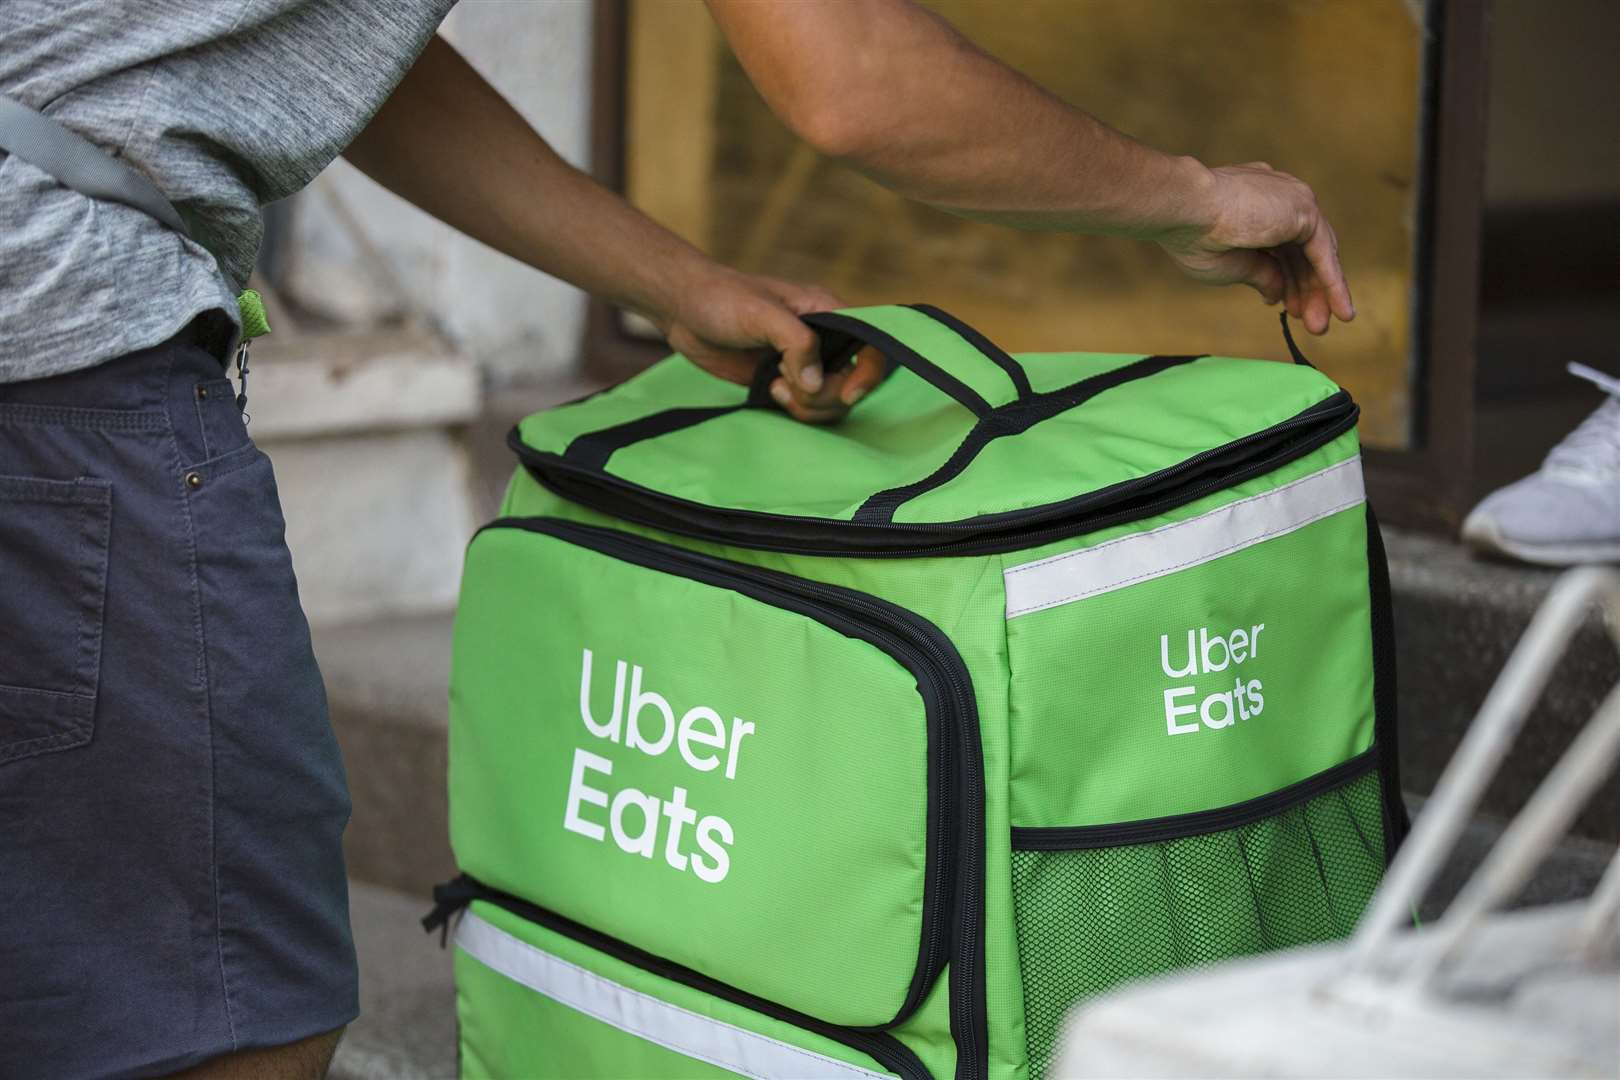 UberEats has told Rachel that it cannot issue a refund